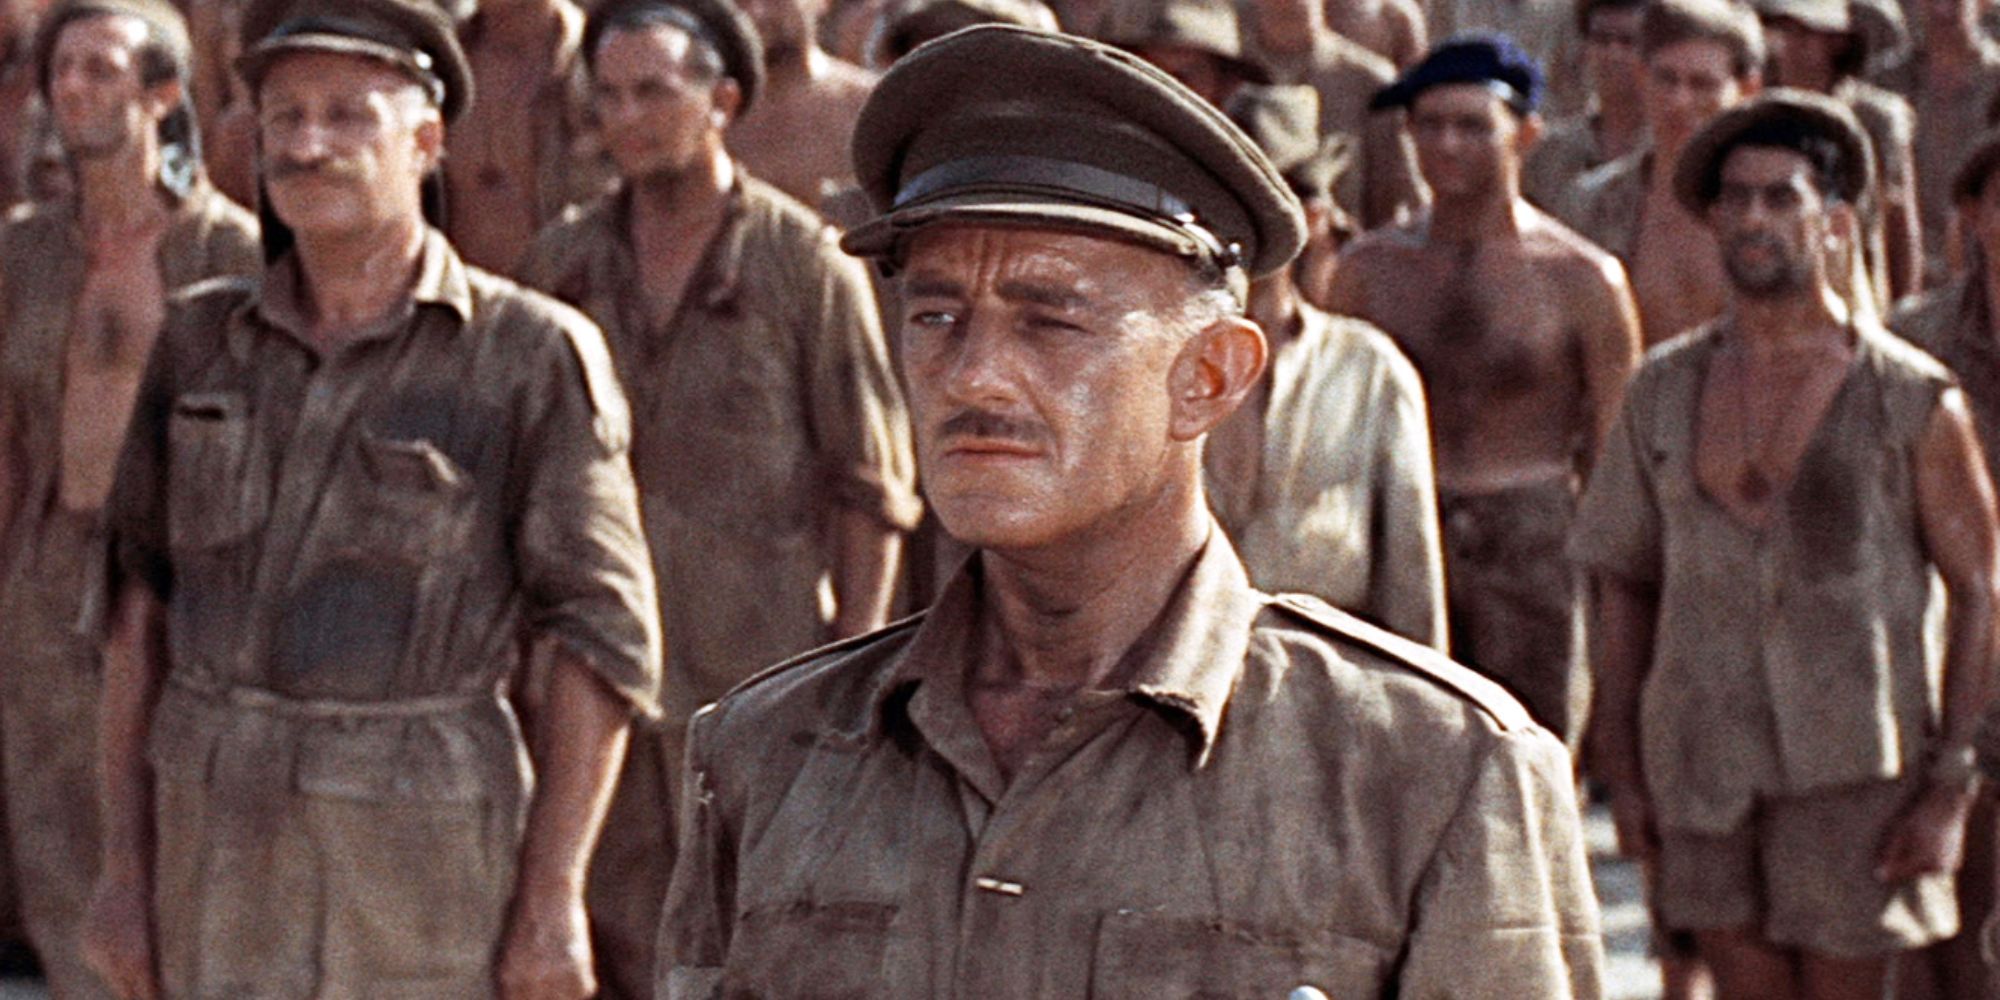 Sir Alec Guinness in 'The Bridge on the River Kwai'